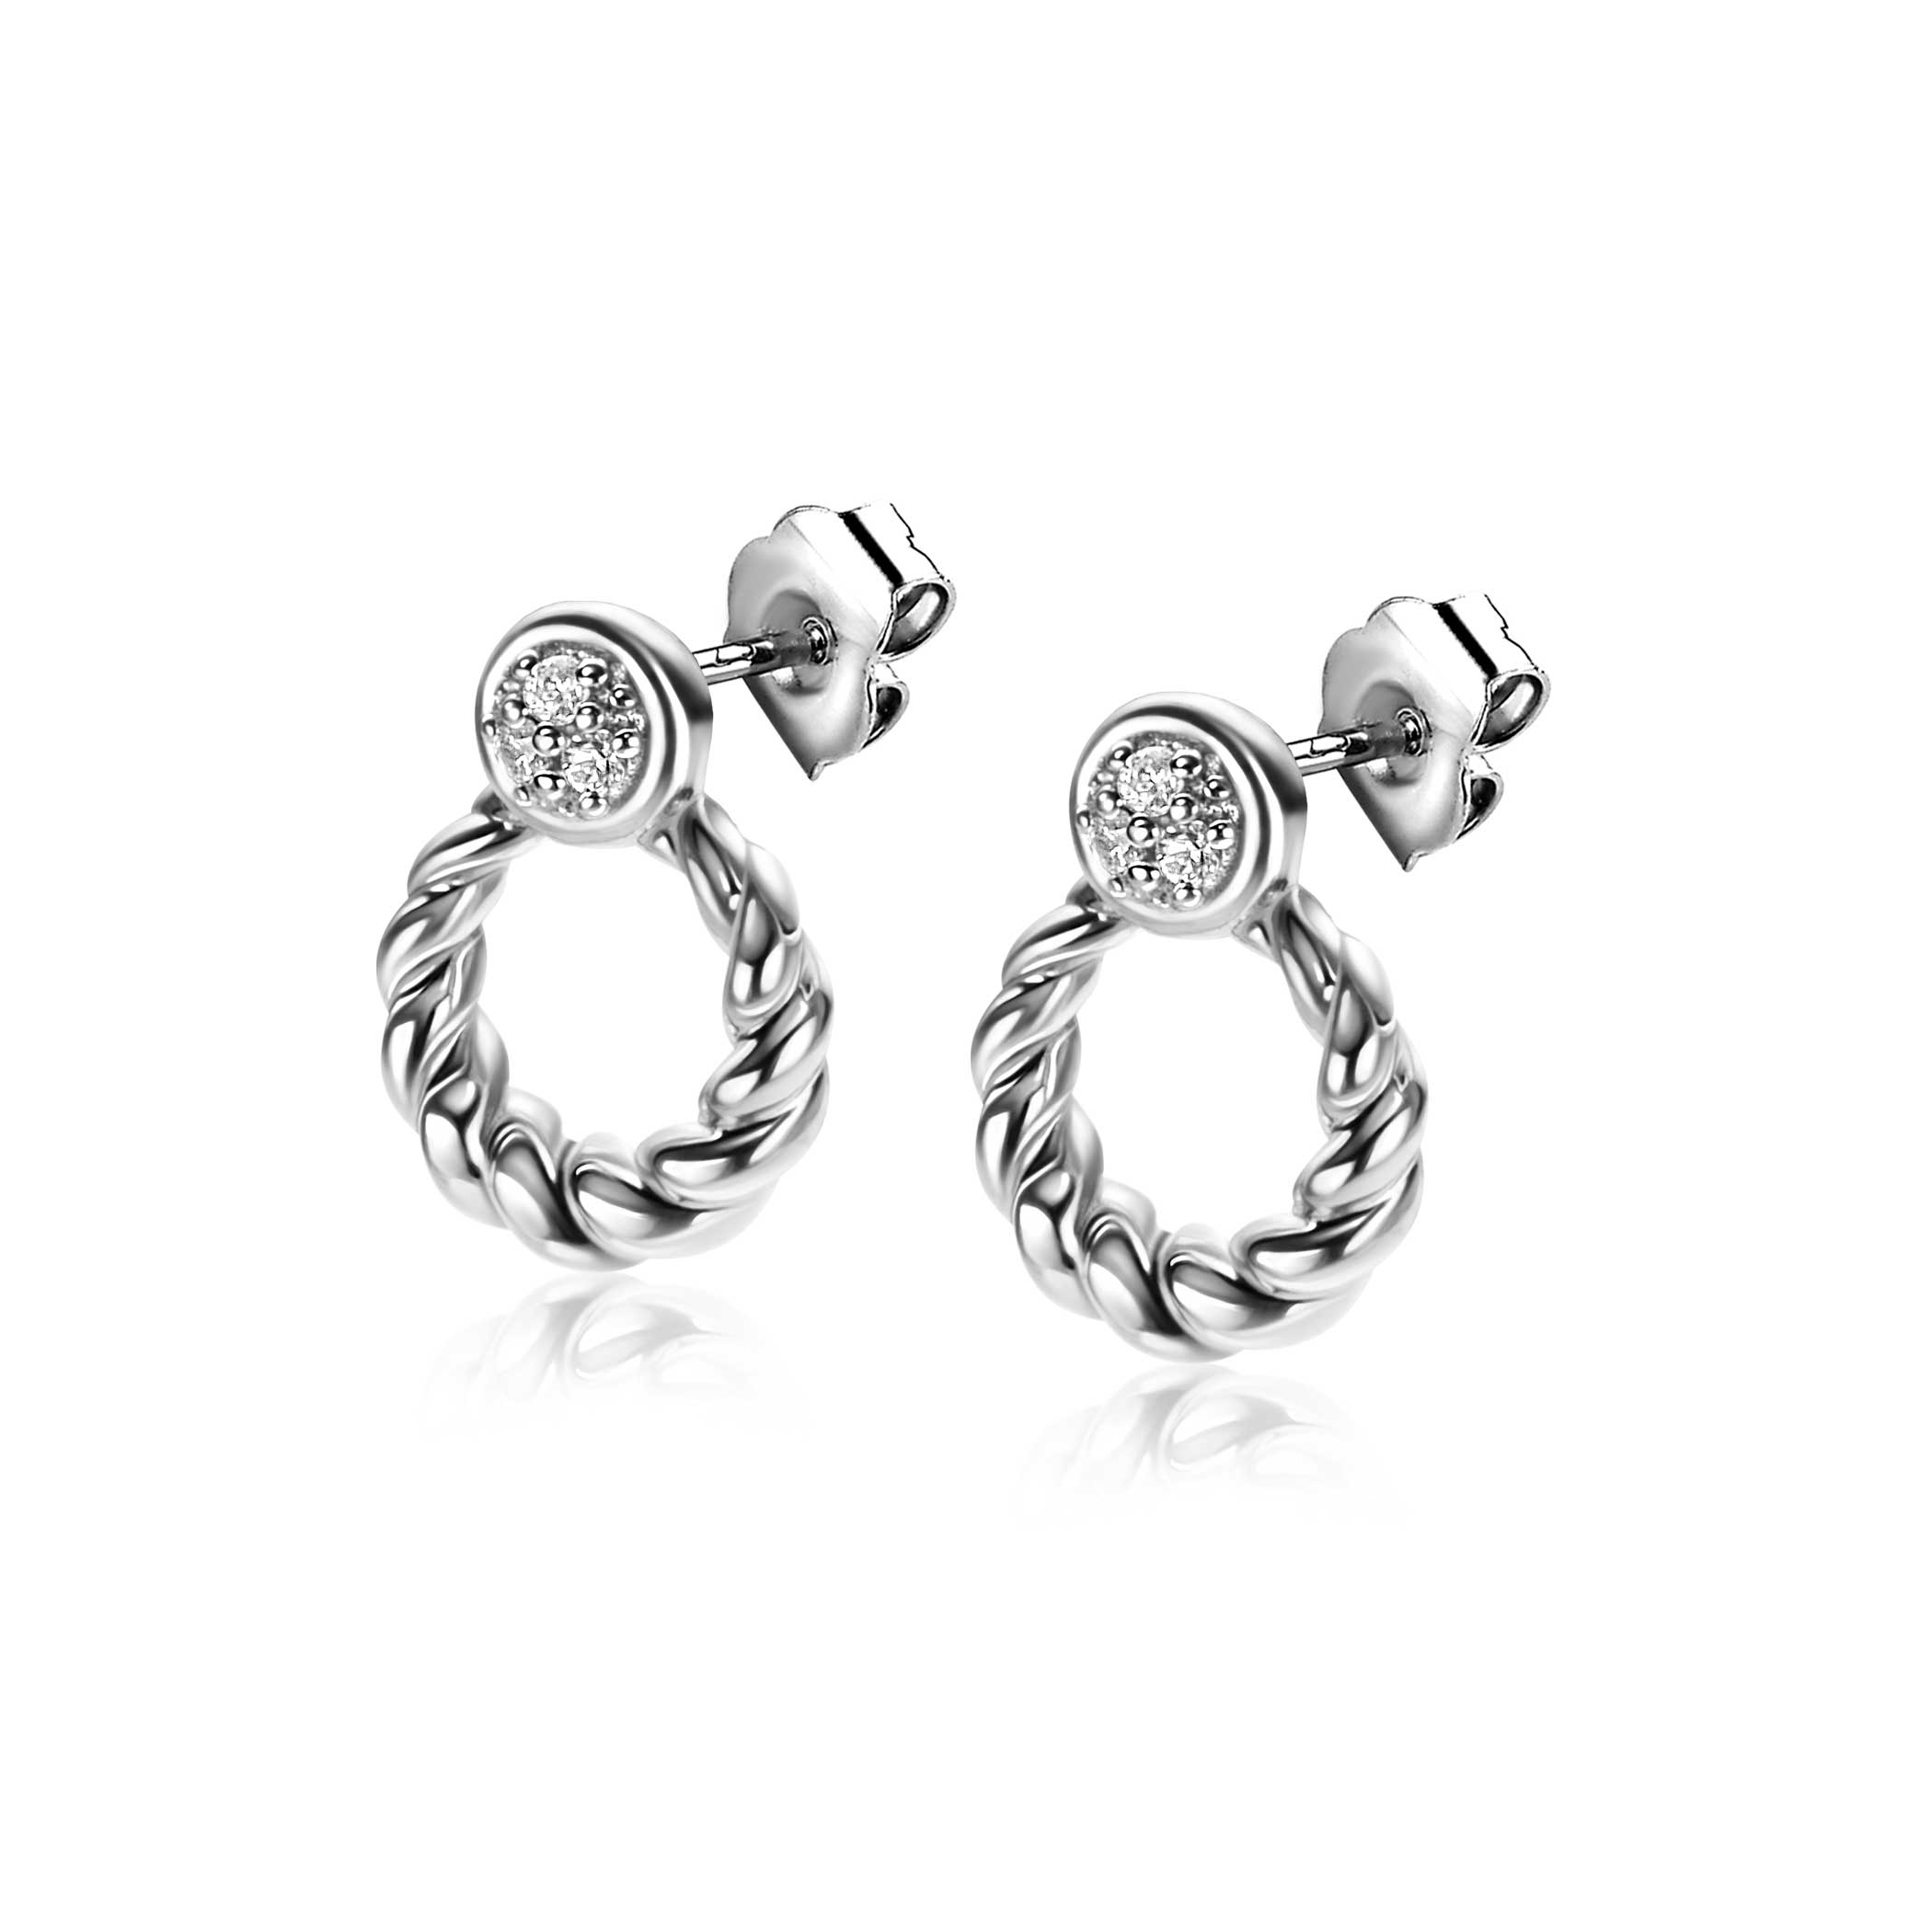 12mm ZINZI Sterling Silver Round Stud Earrings Open Circle Twisted Design and White Zirconias ZIO2390